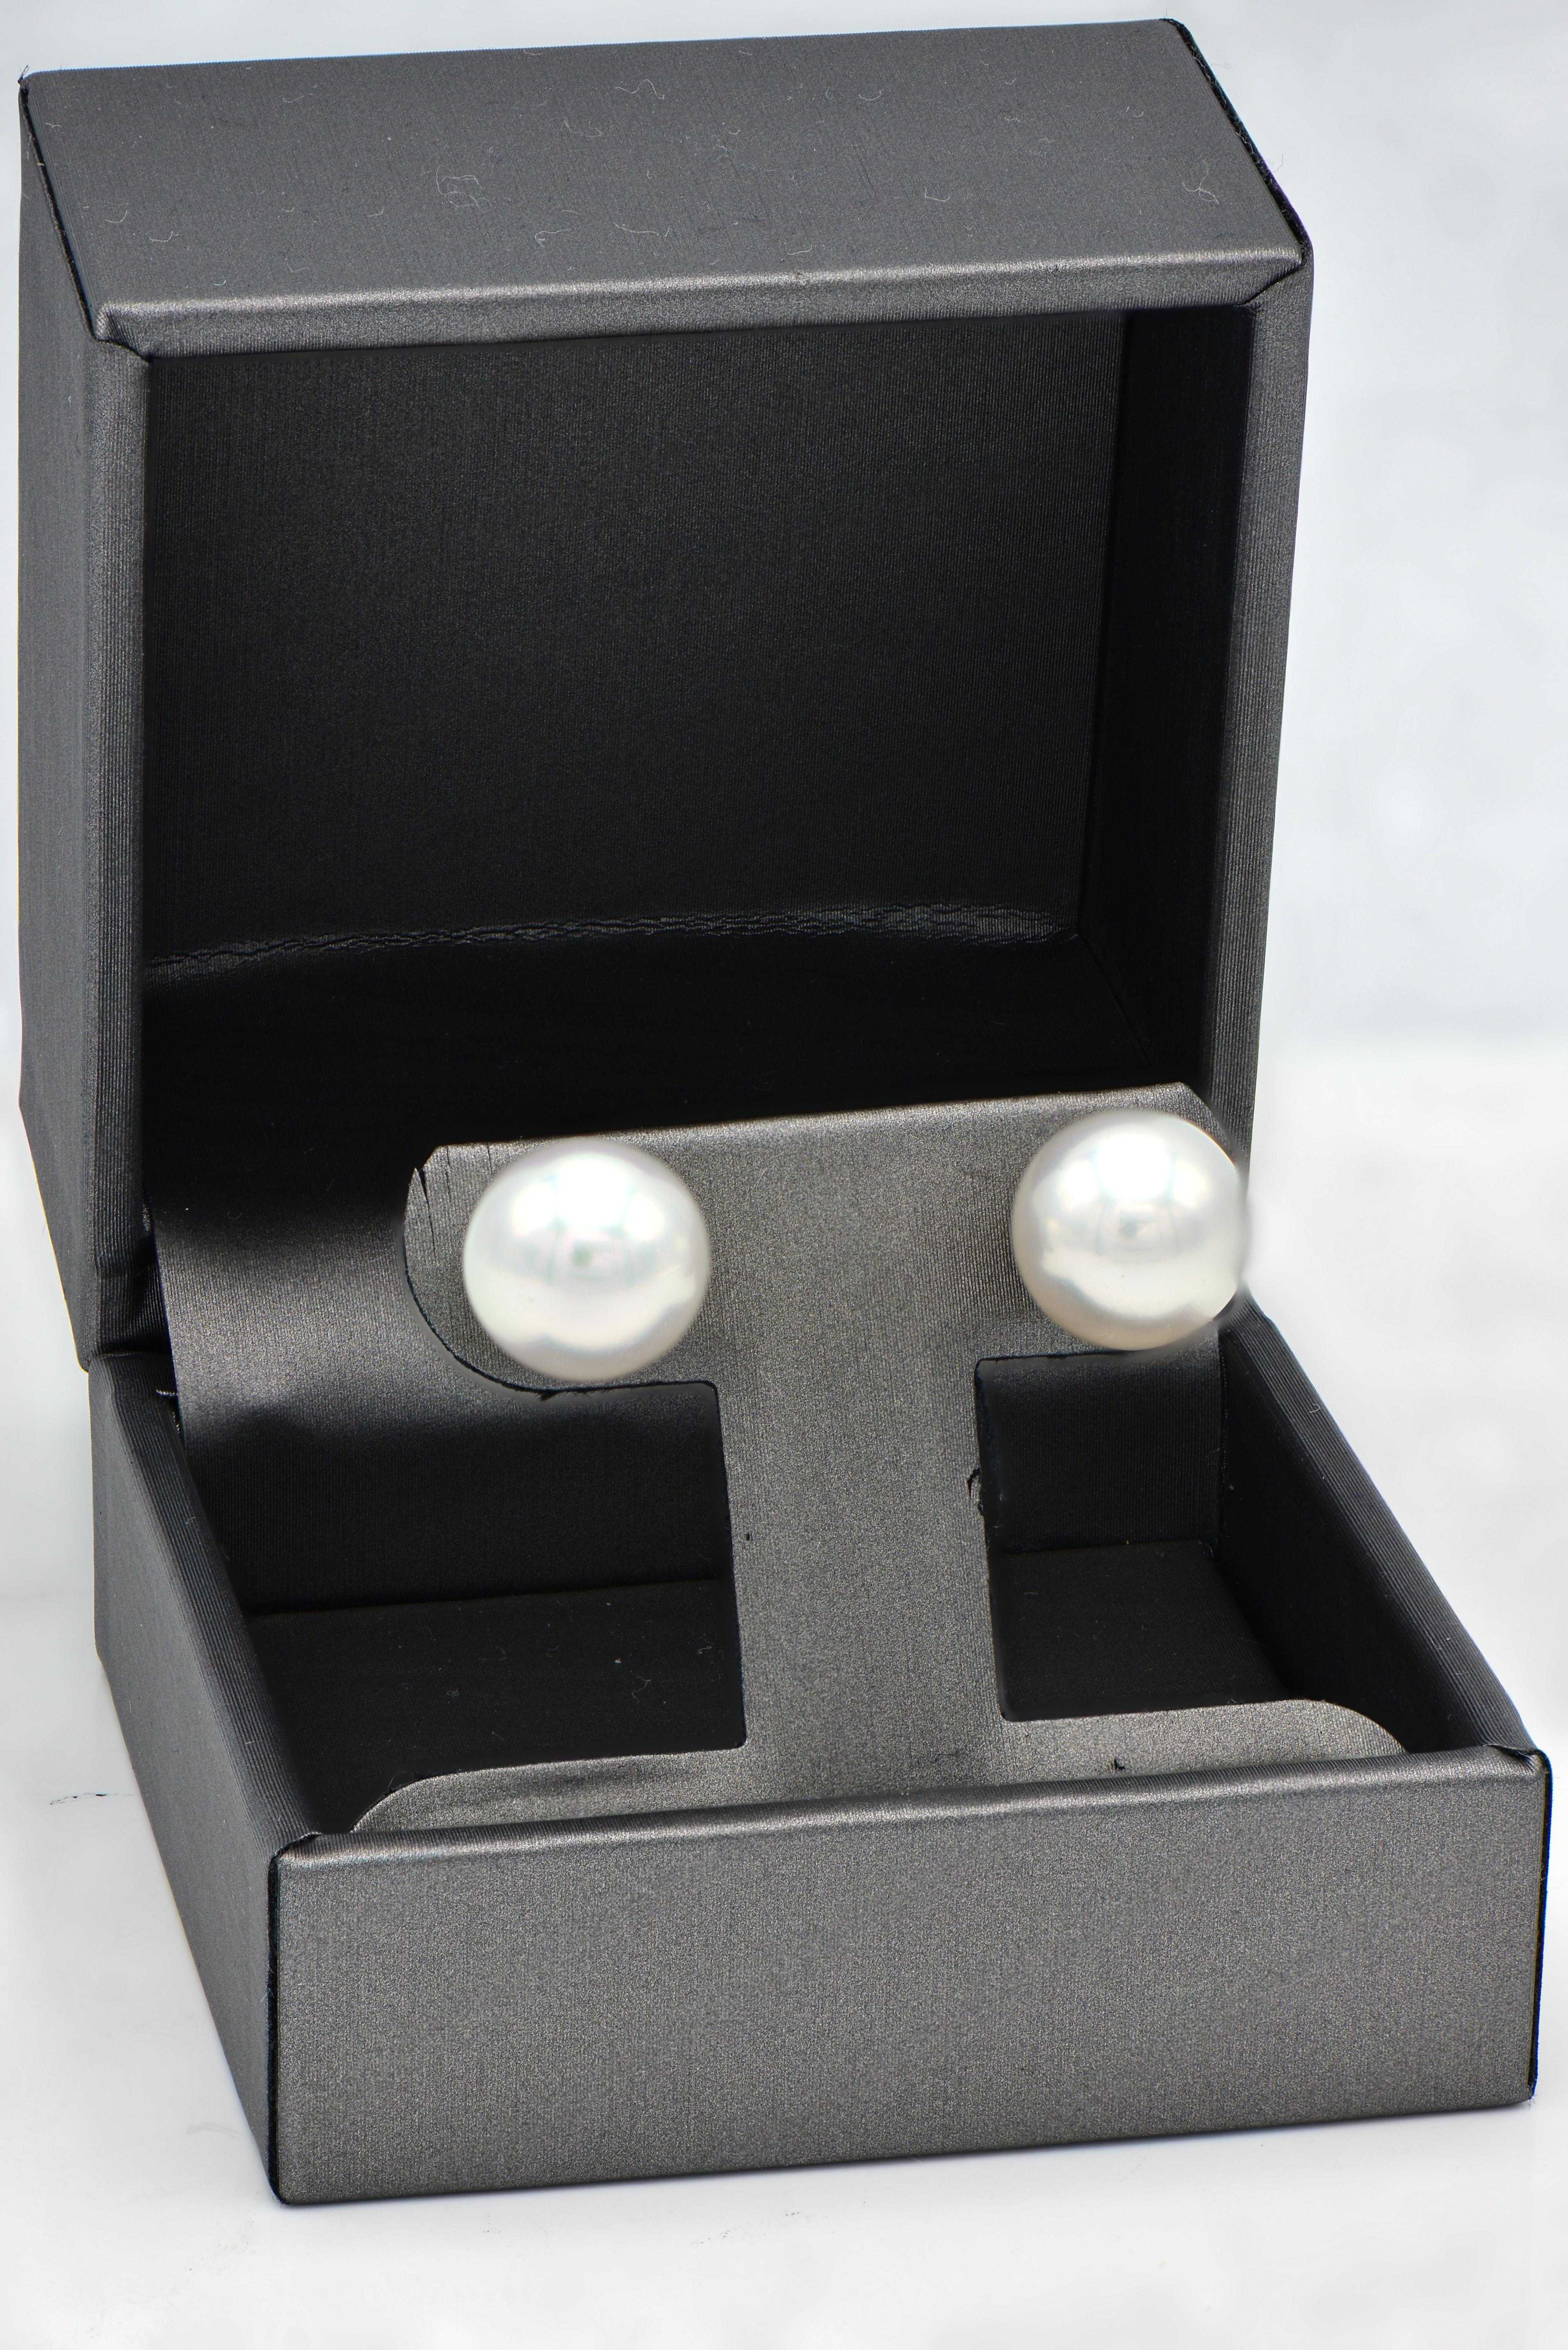 South Sea Pearl Stud Earrings are a classic and timeless piece of jewelry that should be owned by everyone. South Sea studs are slightly larger than cultured pearl studs for a bigger more sophisticated look. These 10.5-11mm South Sea Pearl Studs are